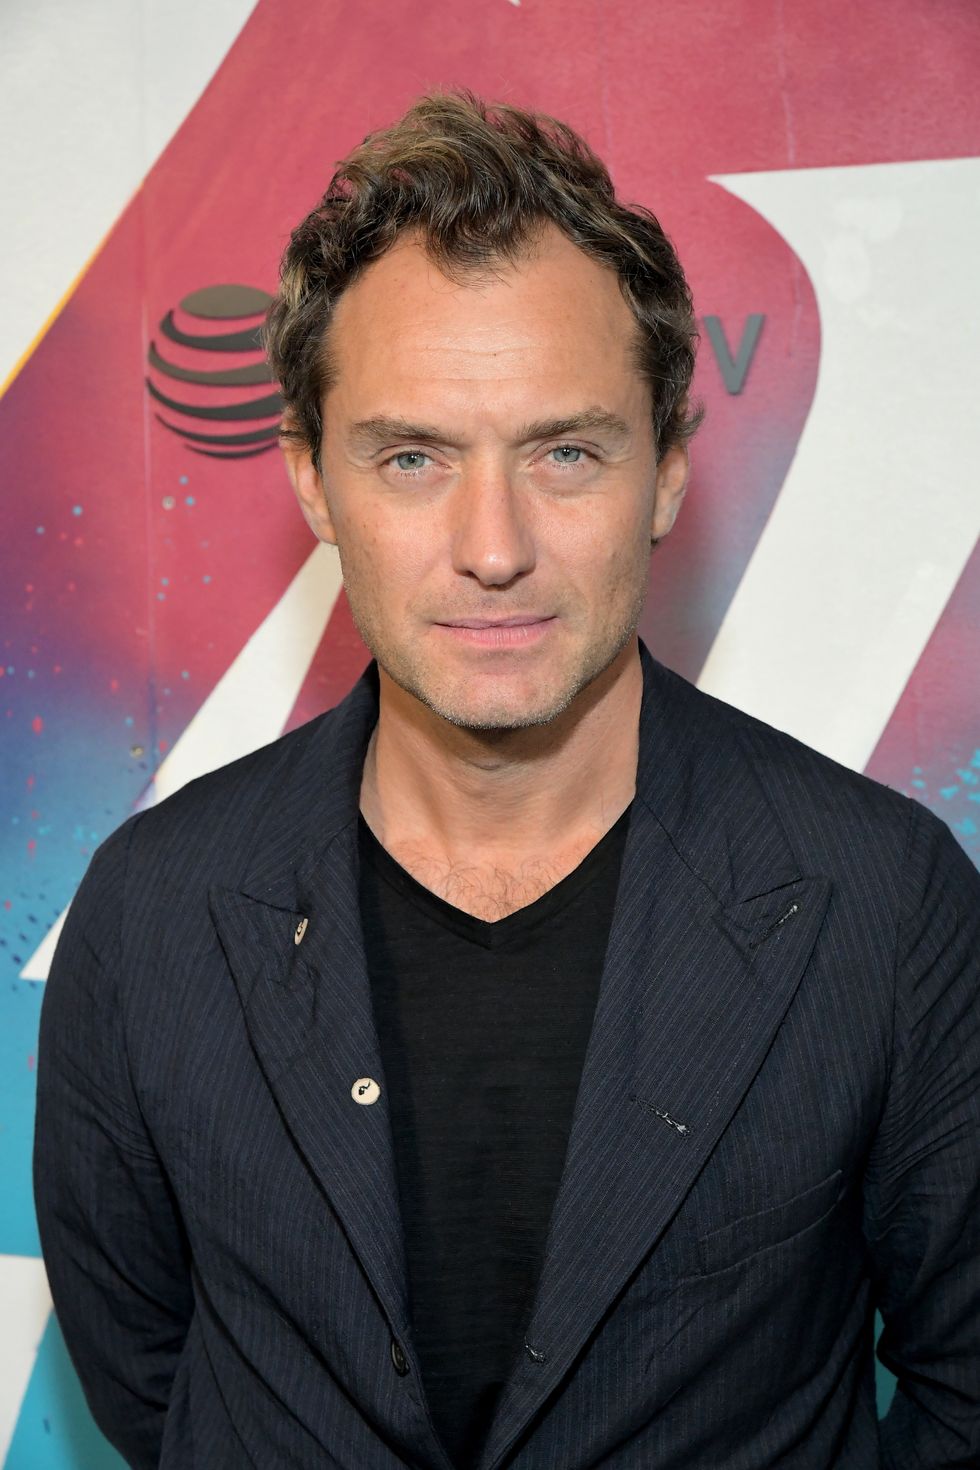 Jude Law's Hair - A Timeline of the Actor's Receding Hairline